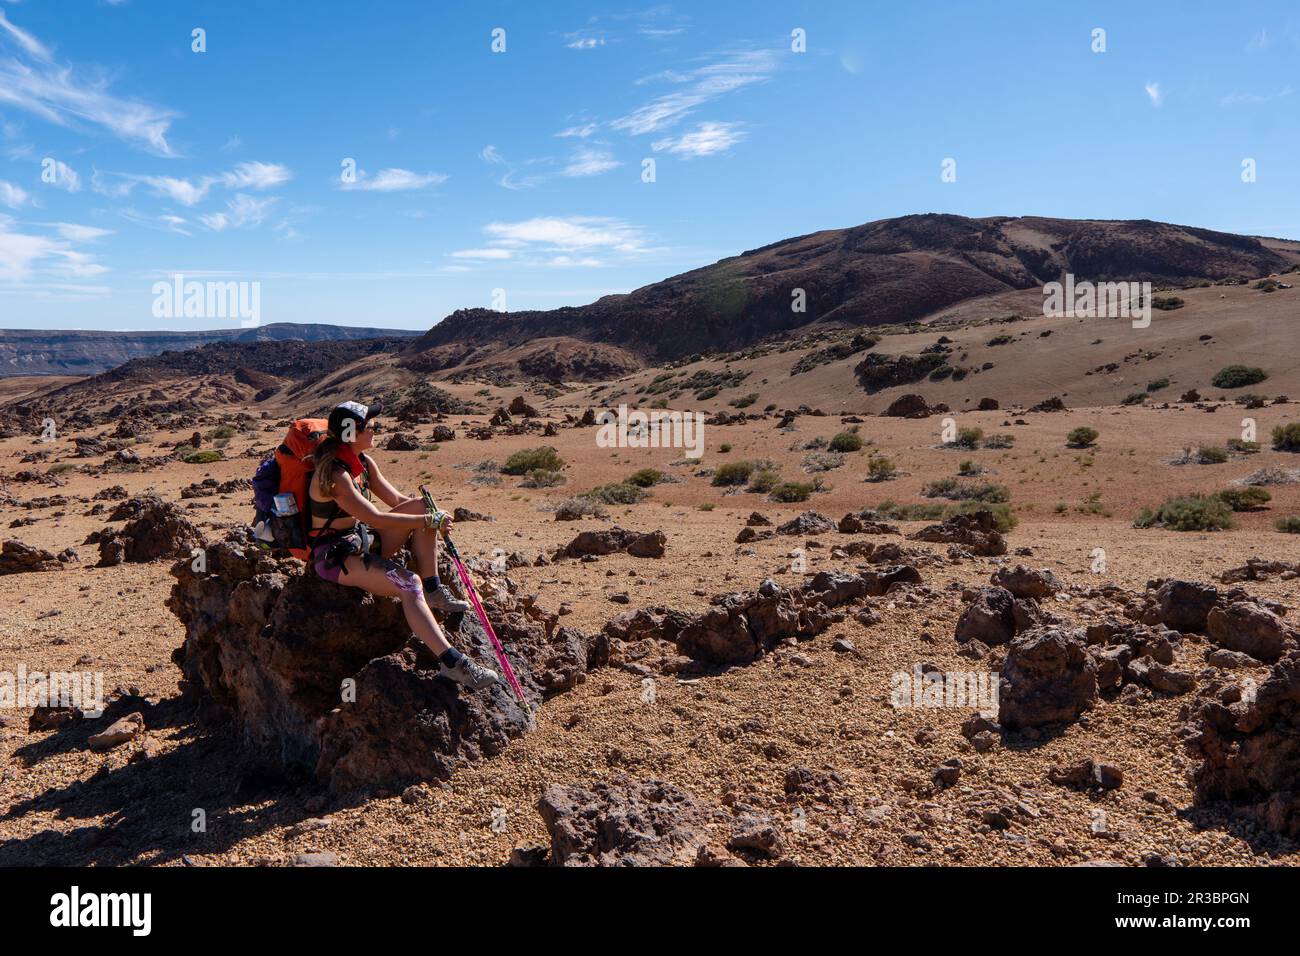 Young woman hiker with backpack trekking near Pico del Teide mountain in El Teide National park. Tenerife, Canary Islands, Spain Stock Photo